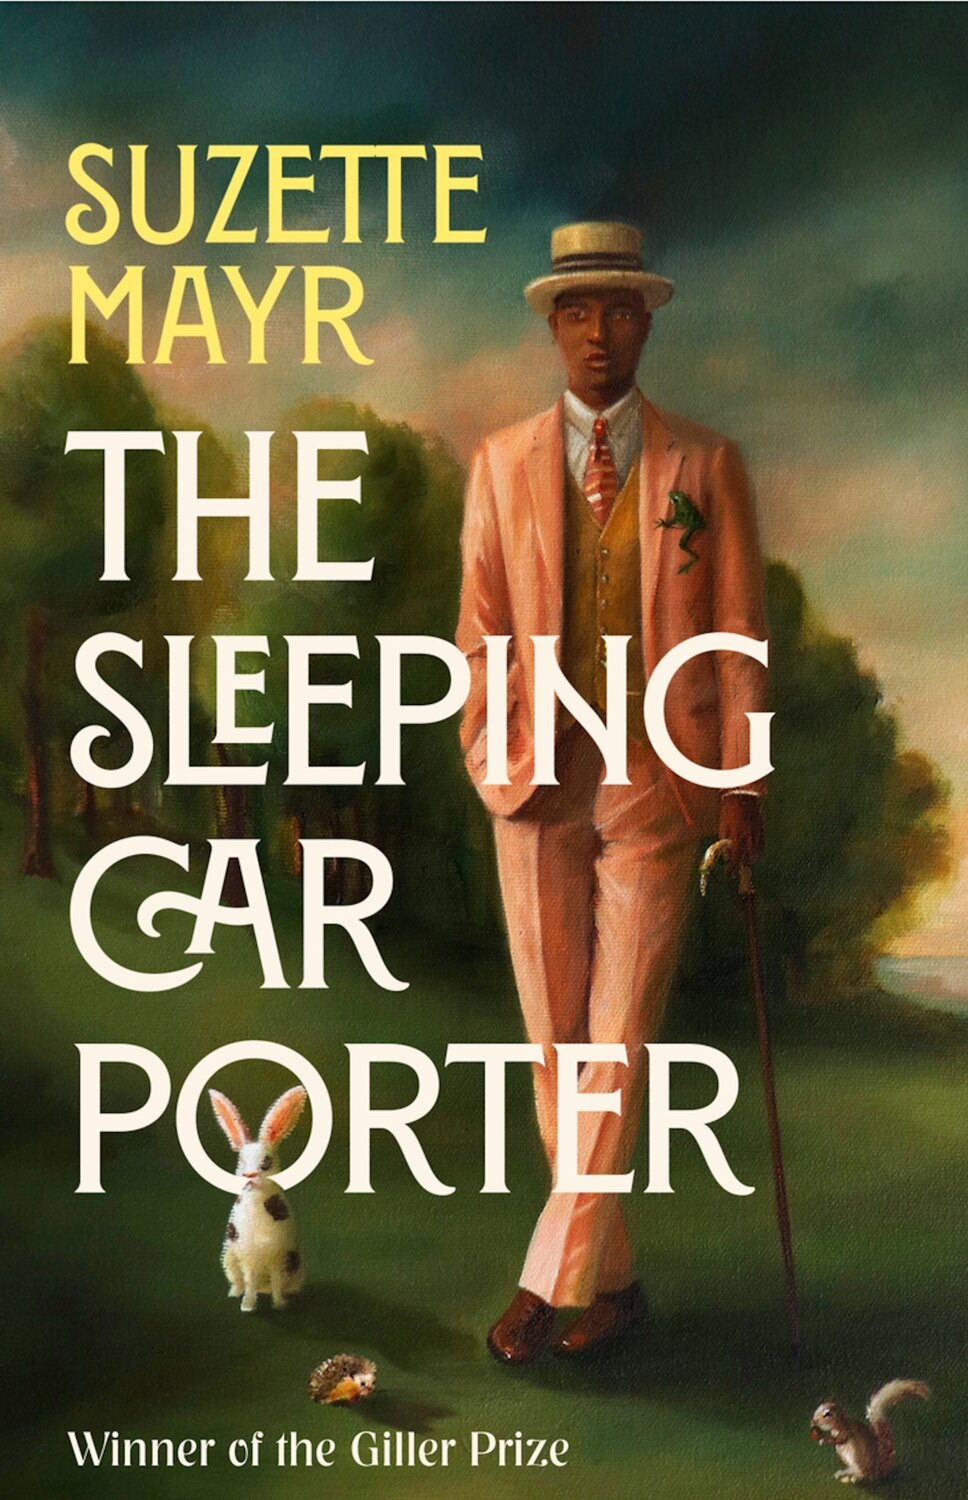 “The Sleeping Car Porter” by Suzette Mayr